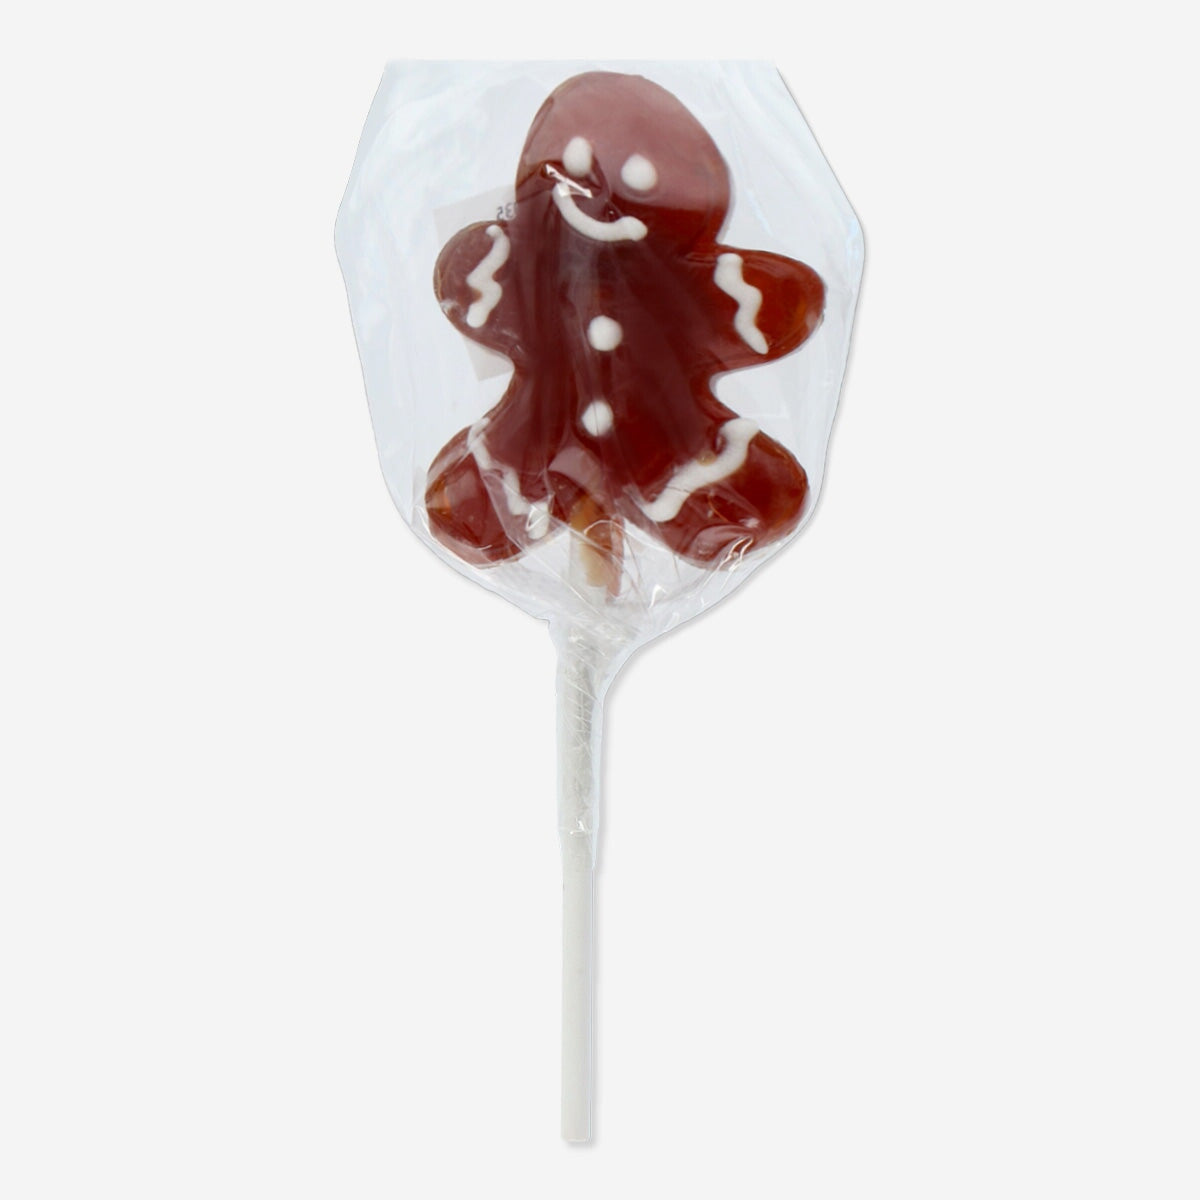 Image of Lollipop. Strawberry flavour